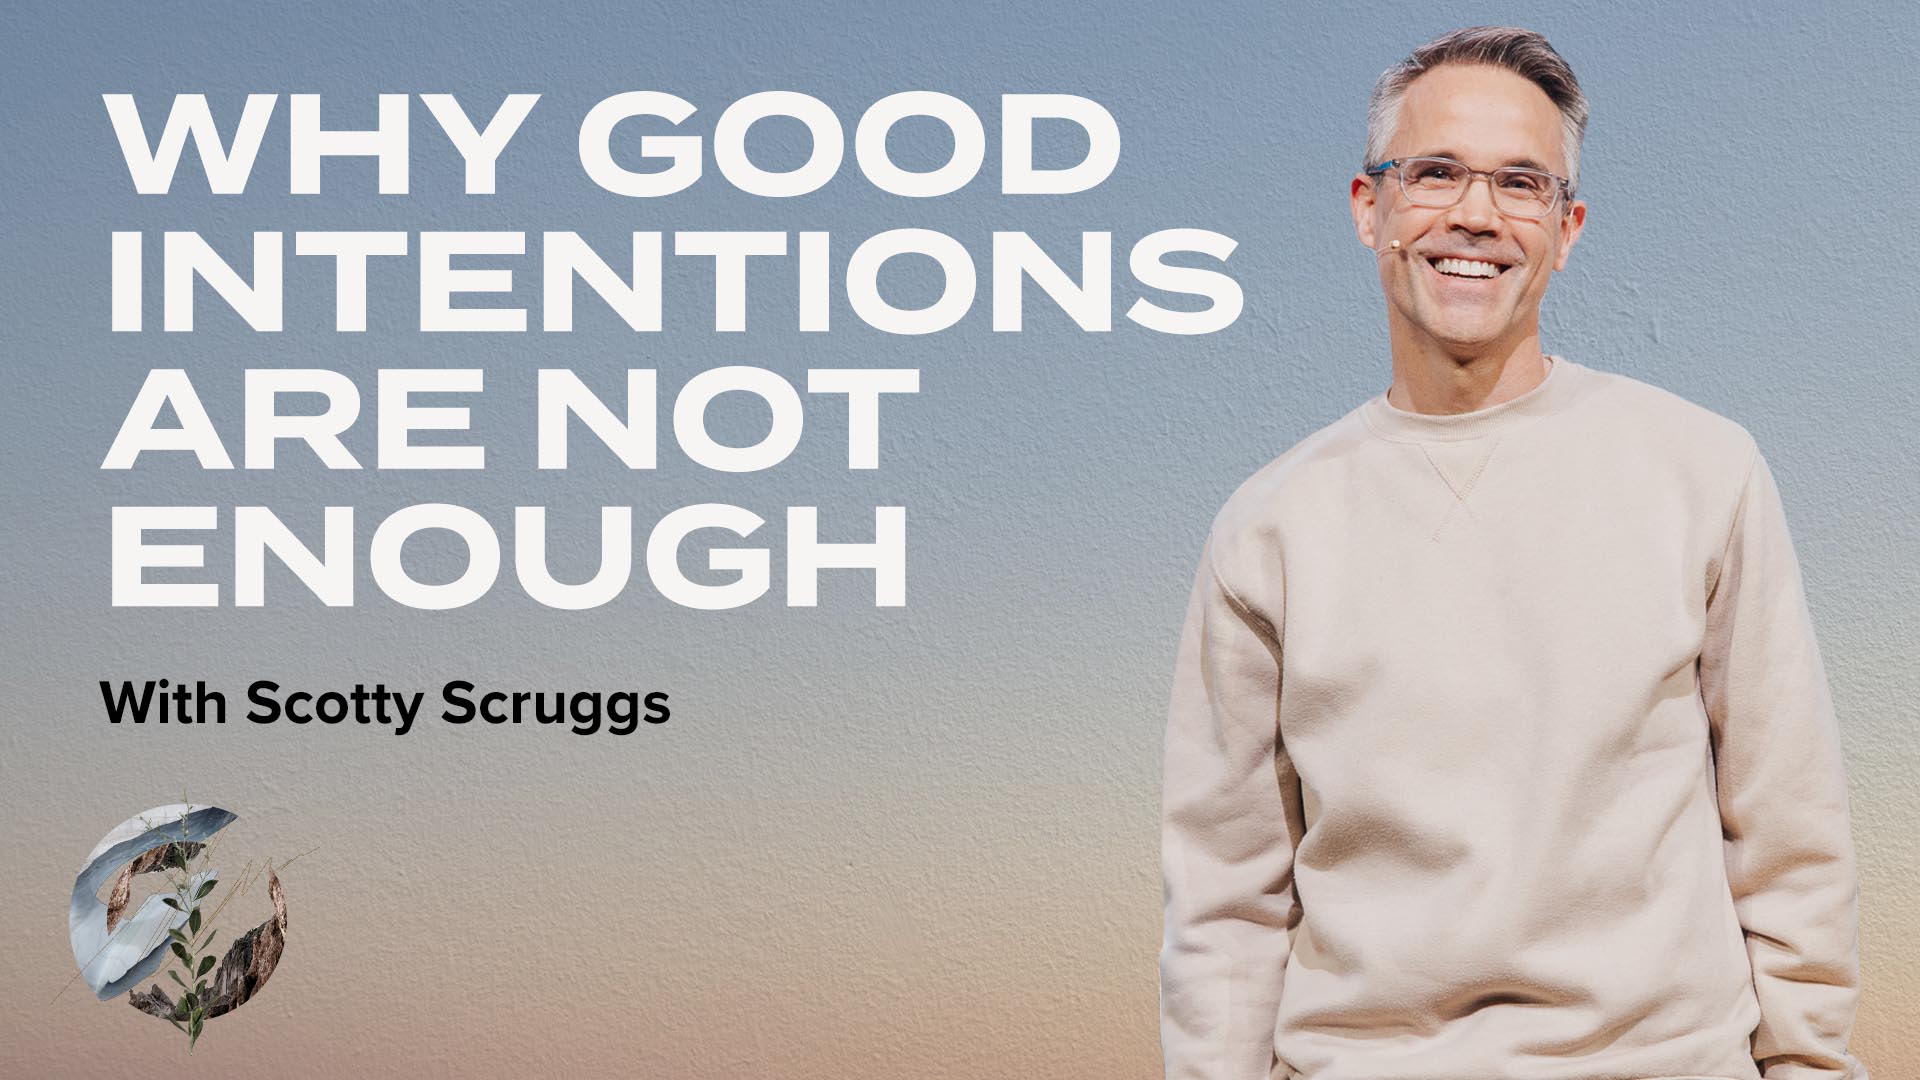 Why Good Intentions Are Not Enough